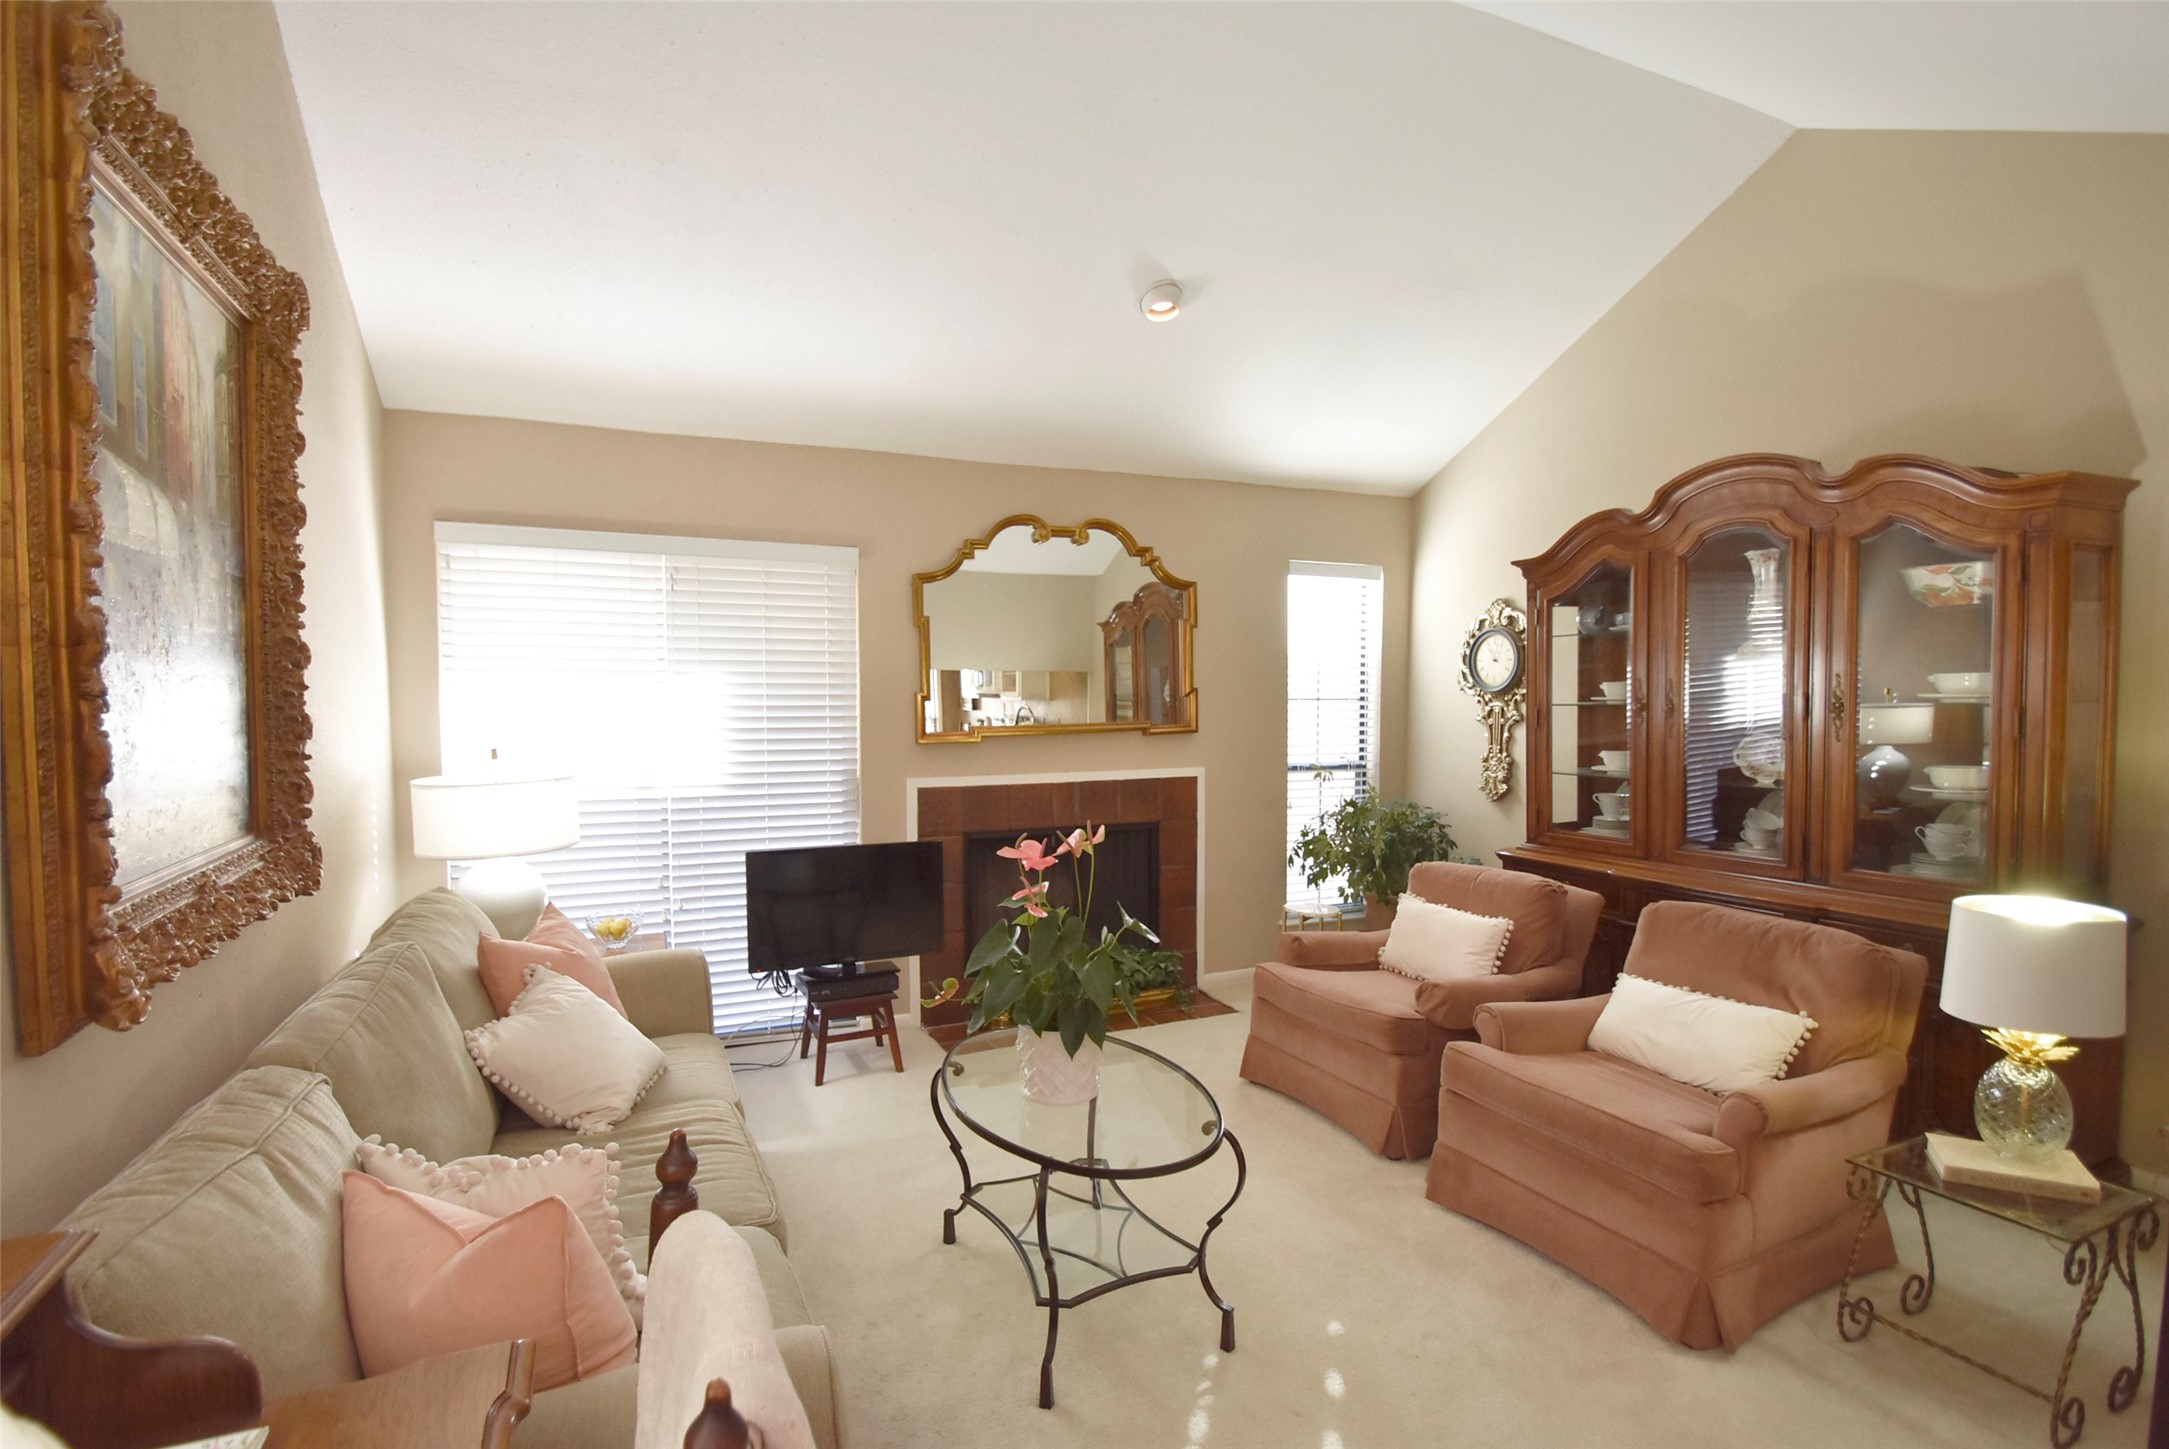 The cozy living are has a wood-burning fireplace and vaulted ceilings.